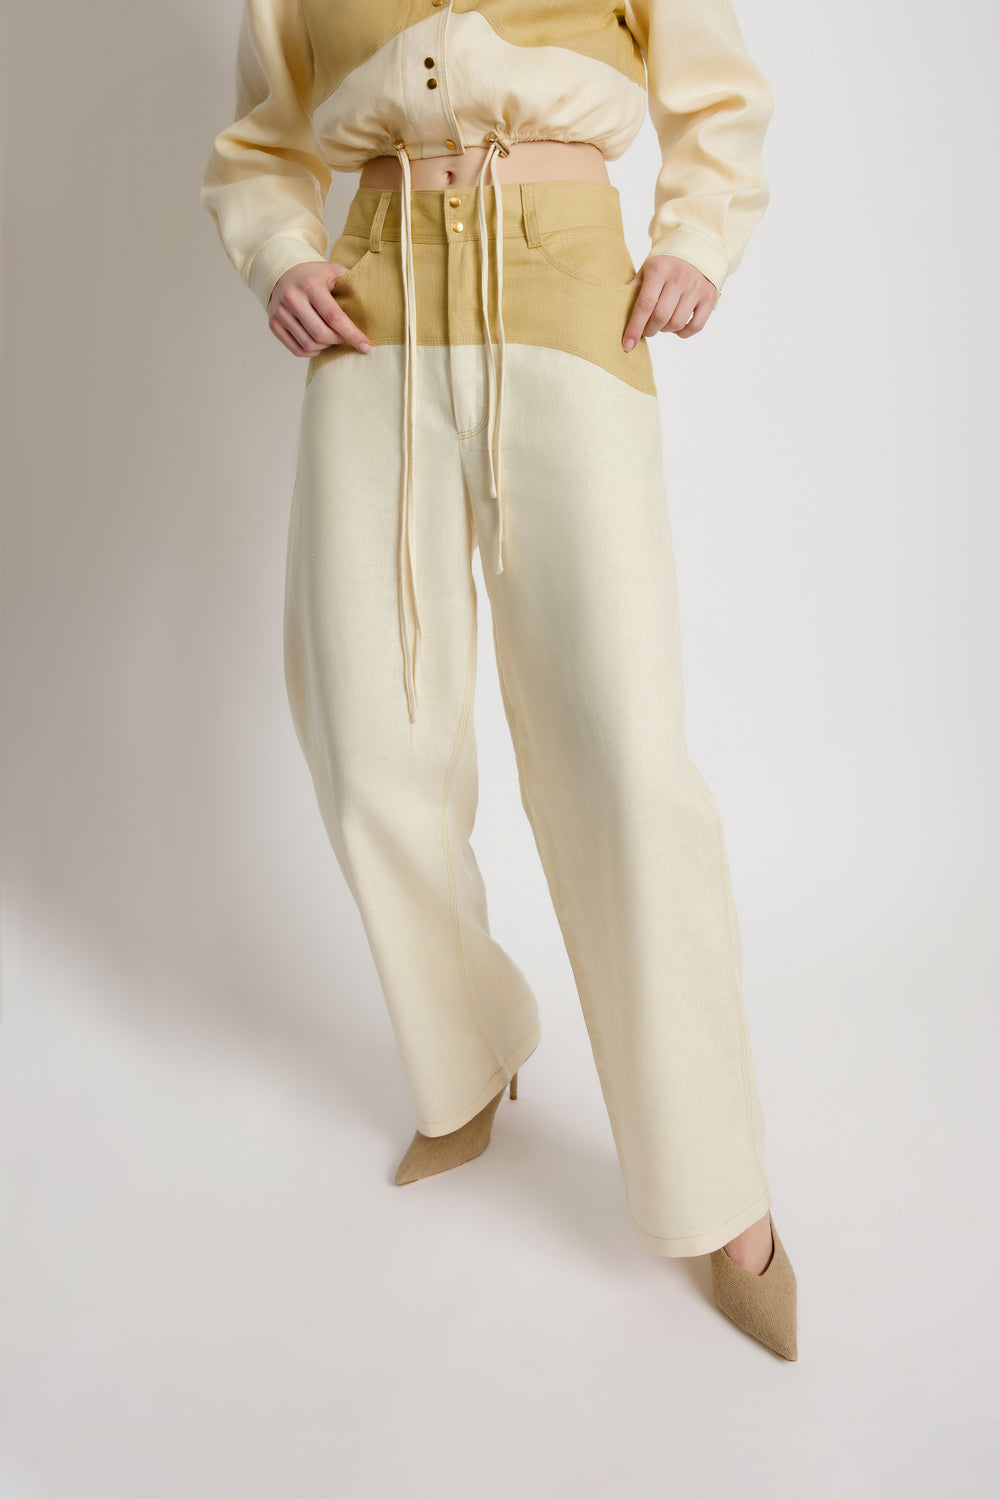 Two Tone Pant - Leaf Green and Pear